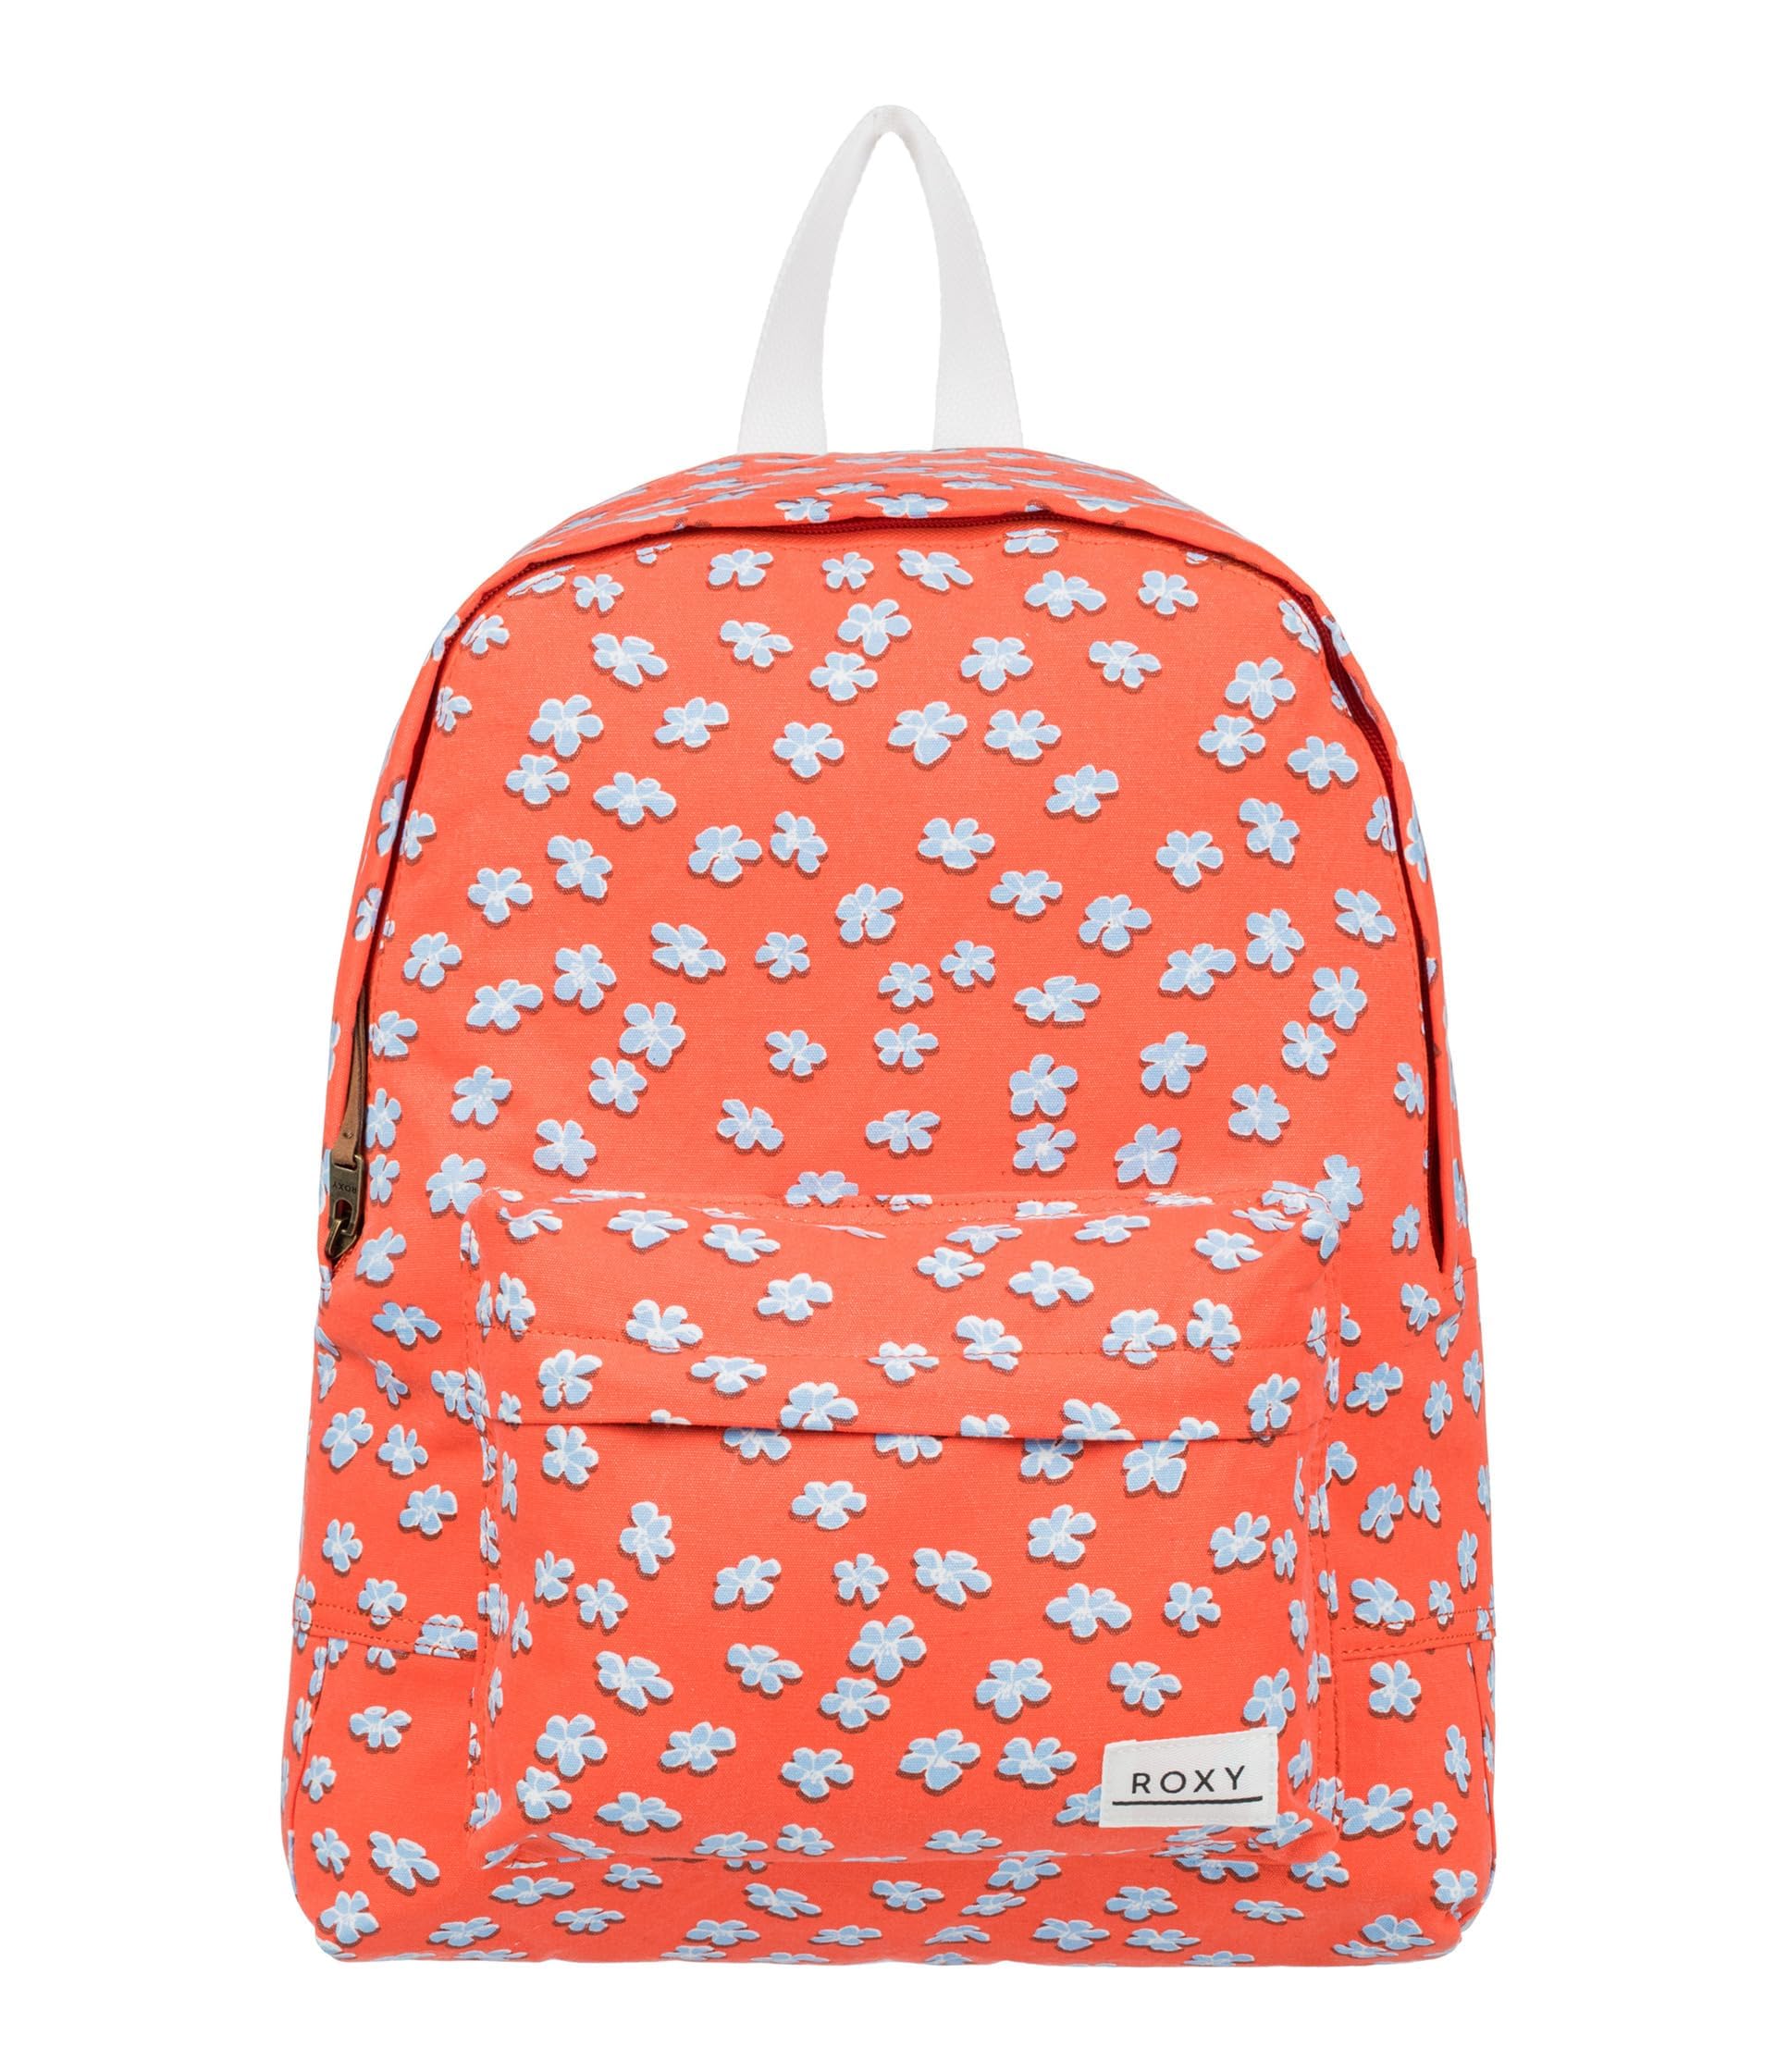 Roxy Women's Sugar Baby Canvas Backpack, Tiger Lily Flower Rain, One Size